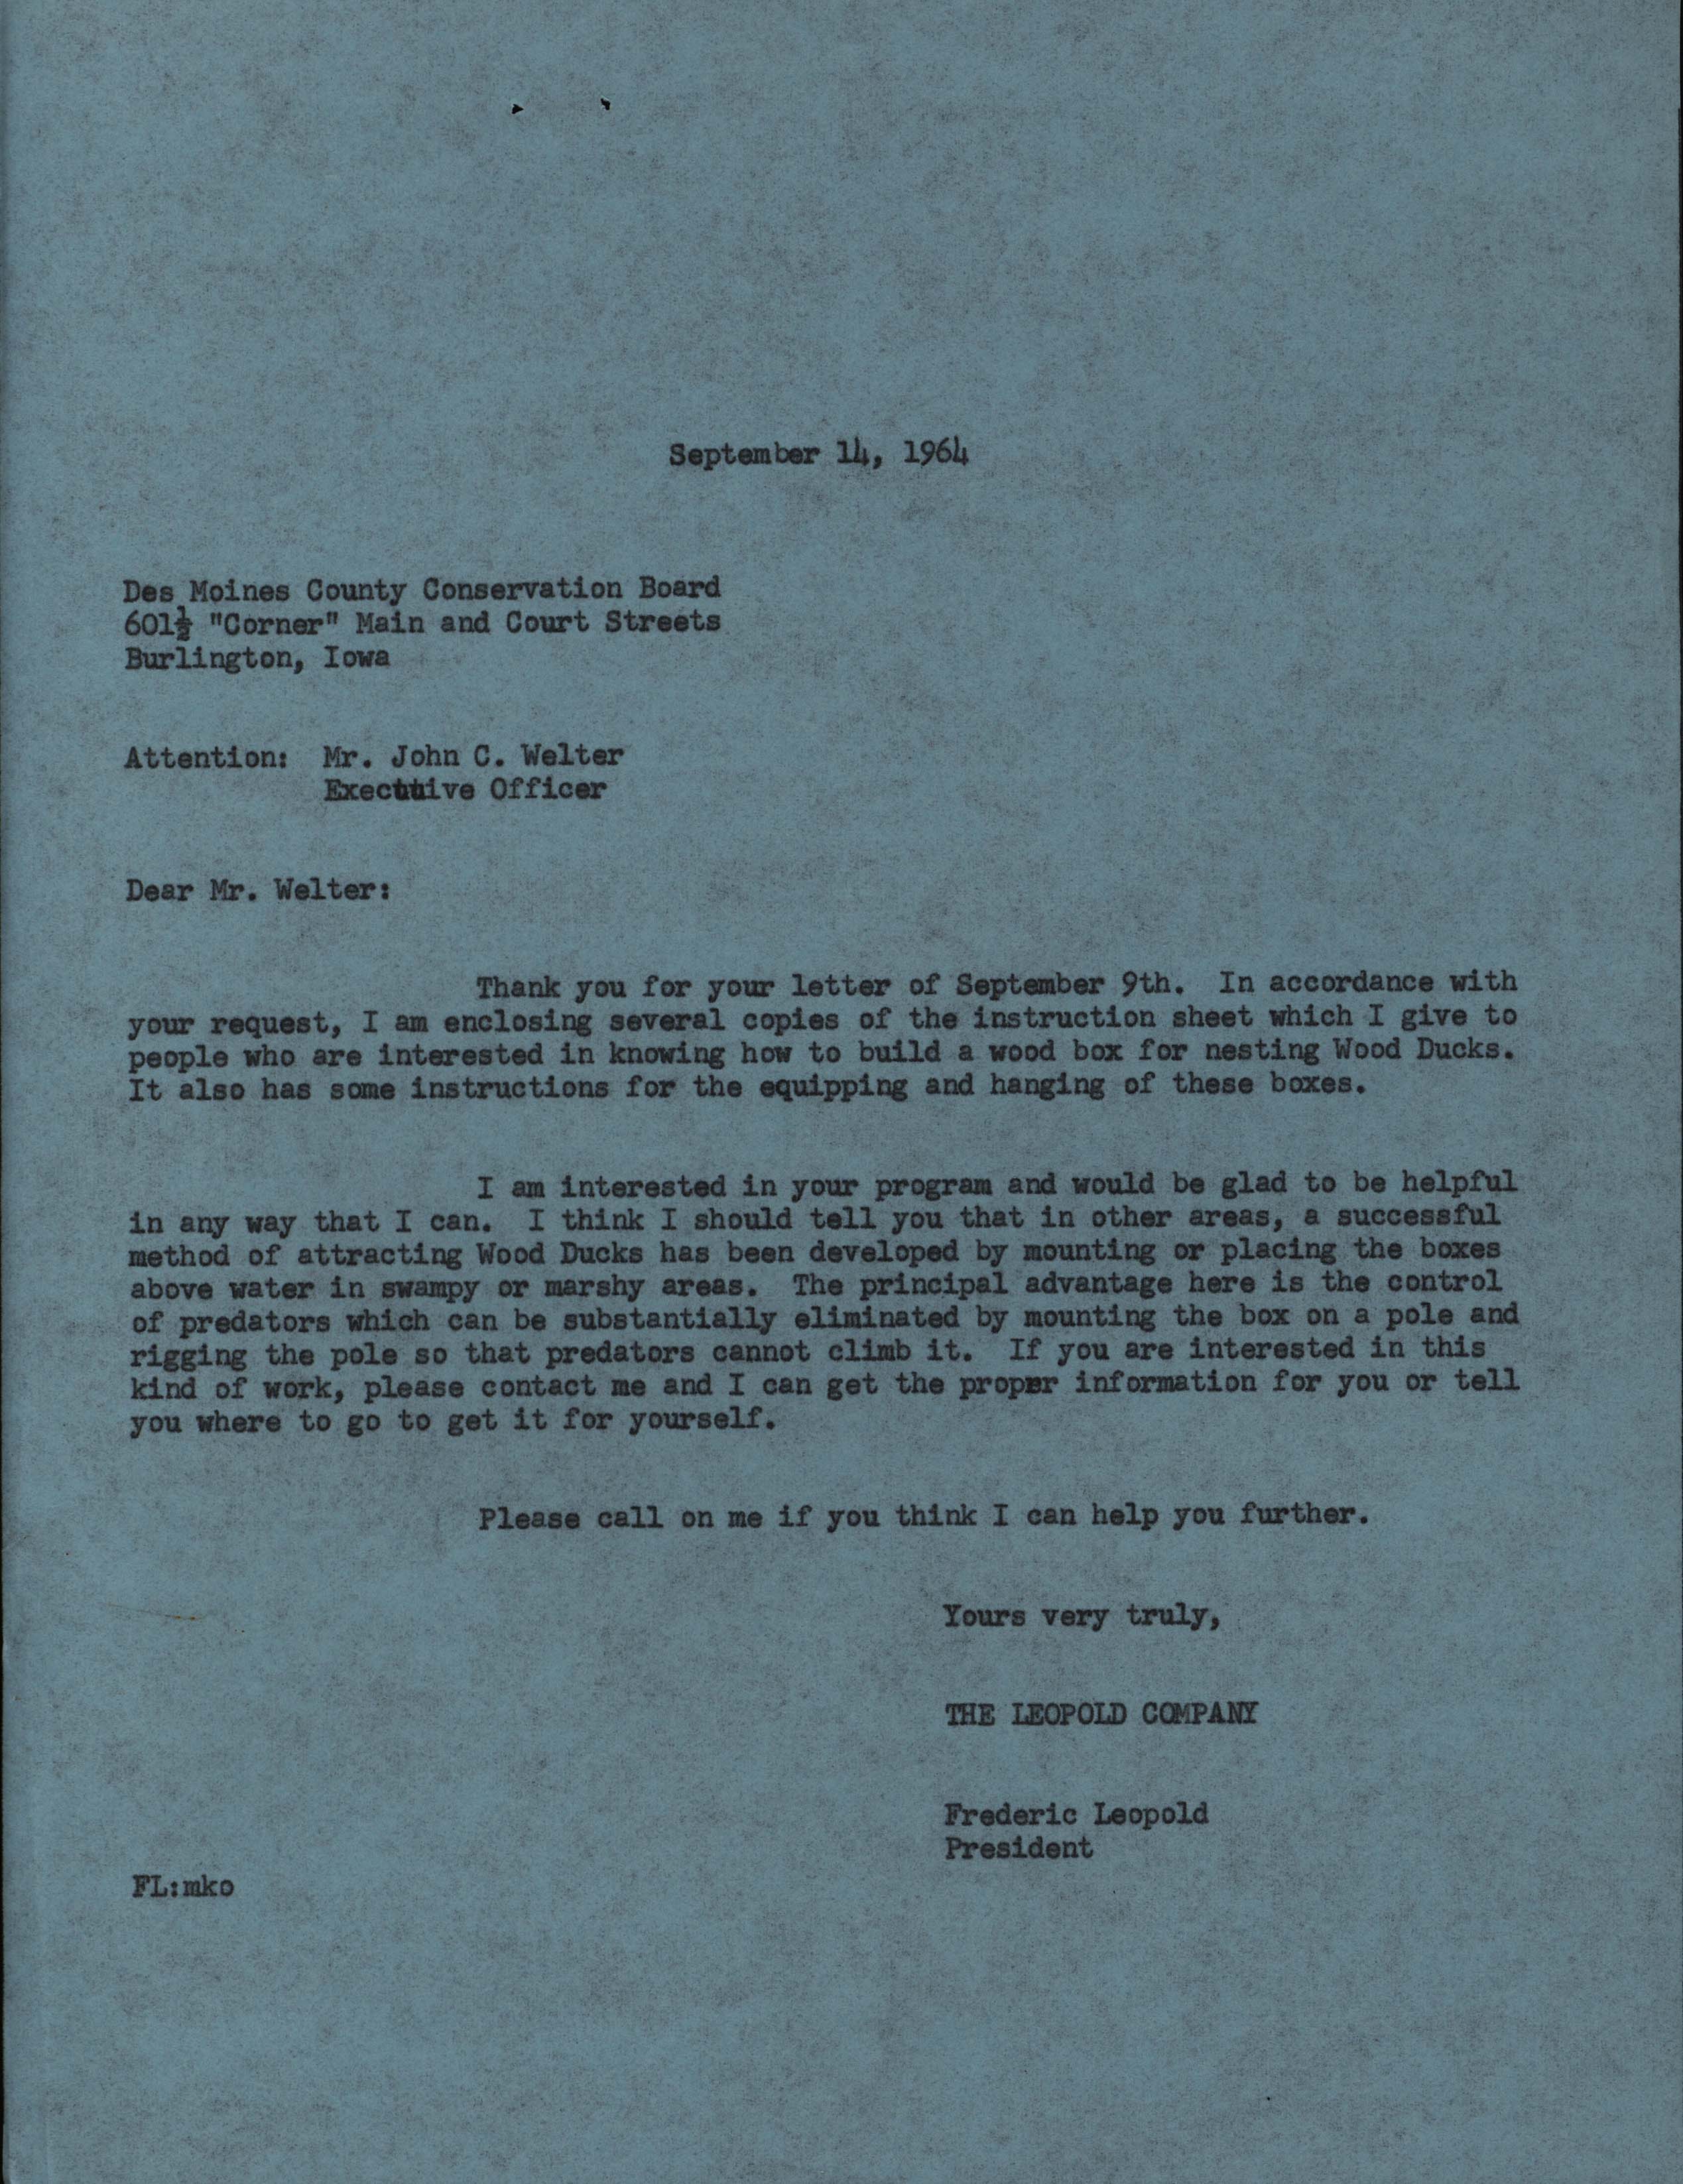 Frederic Leopold letter to John C. Welter regarding a request for Wood Duck house information, September 14, 1964